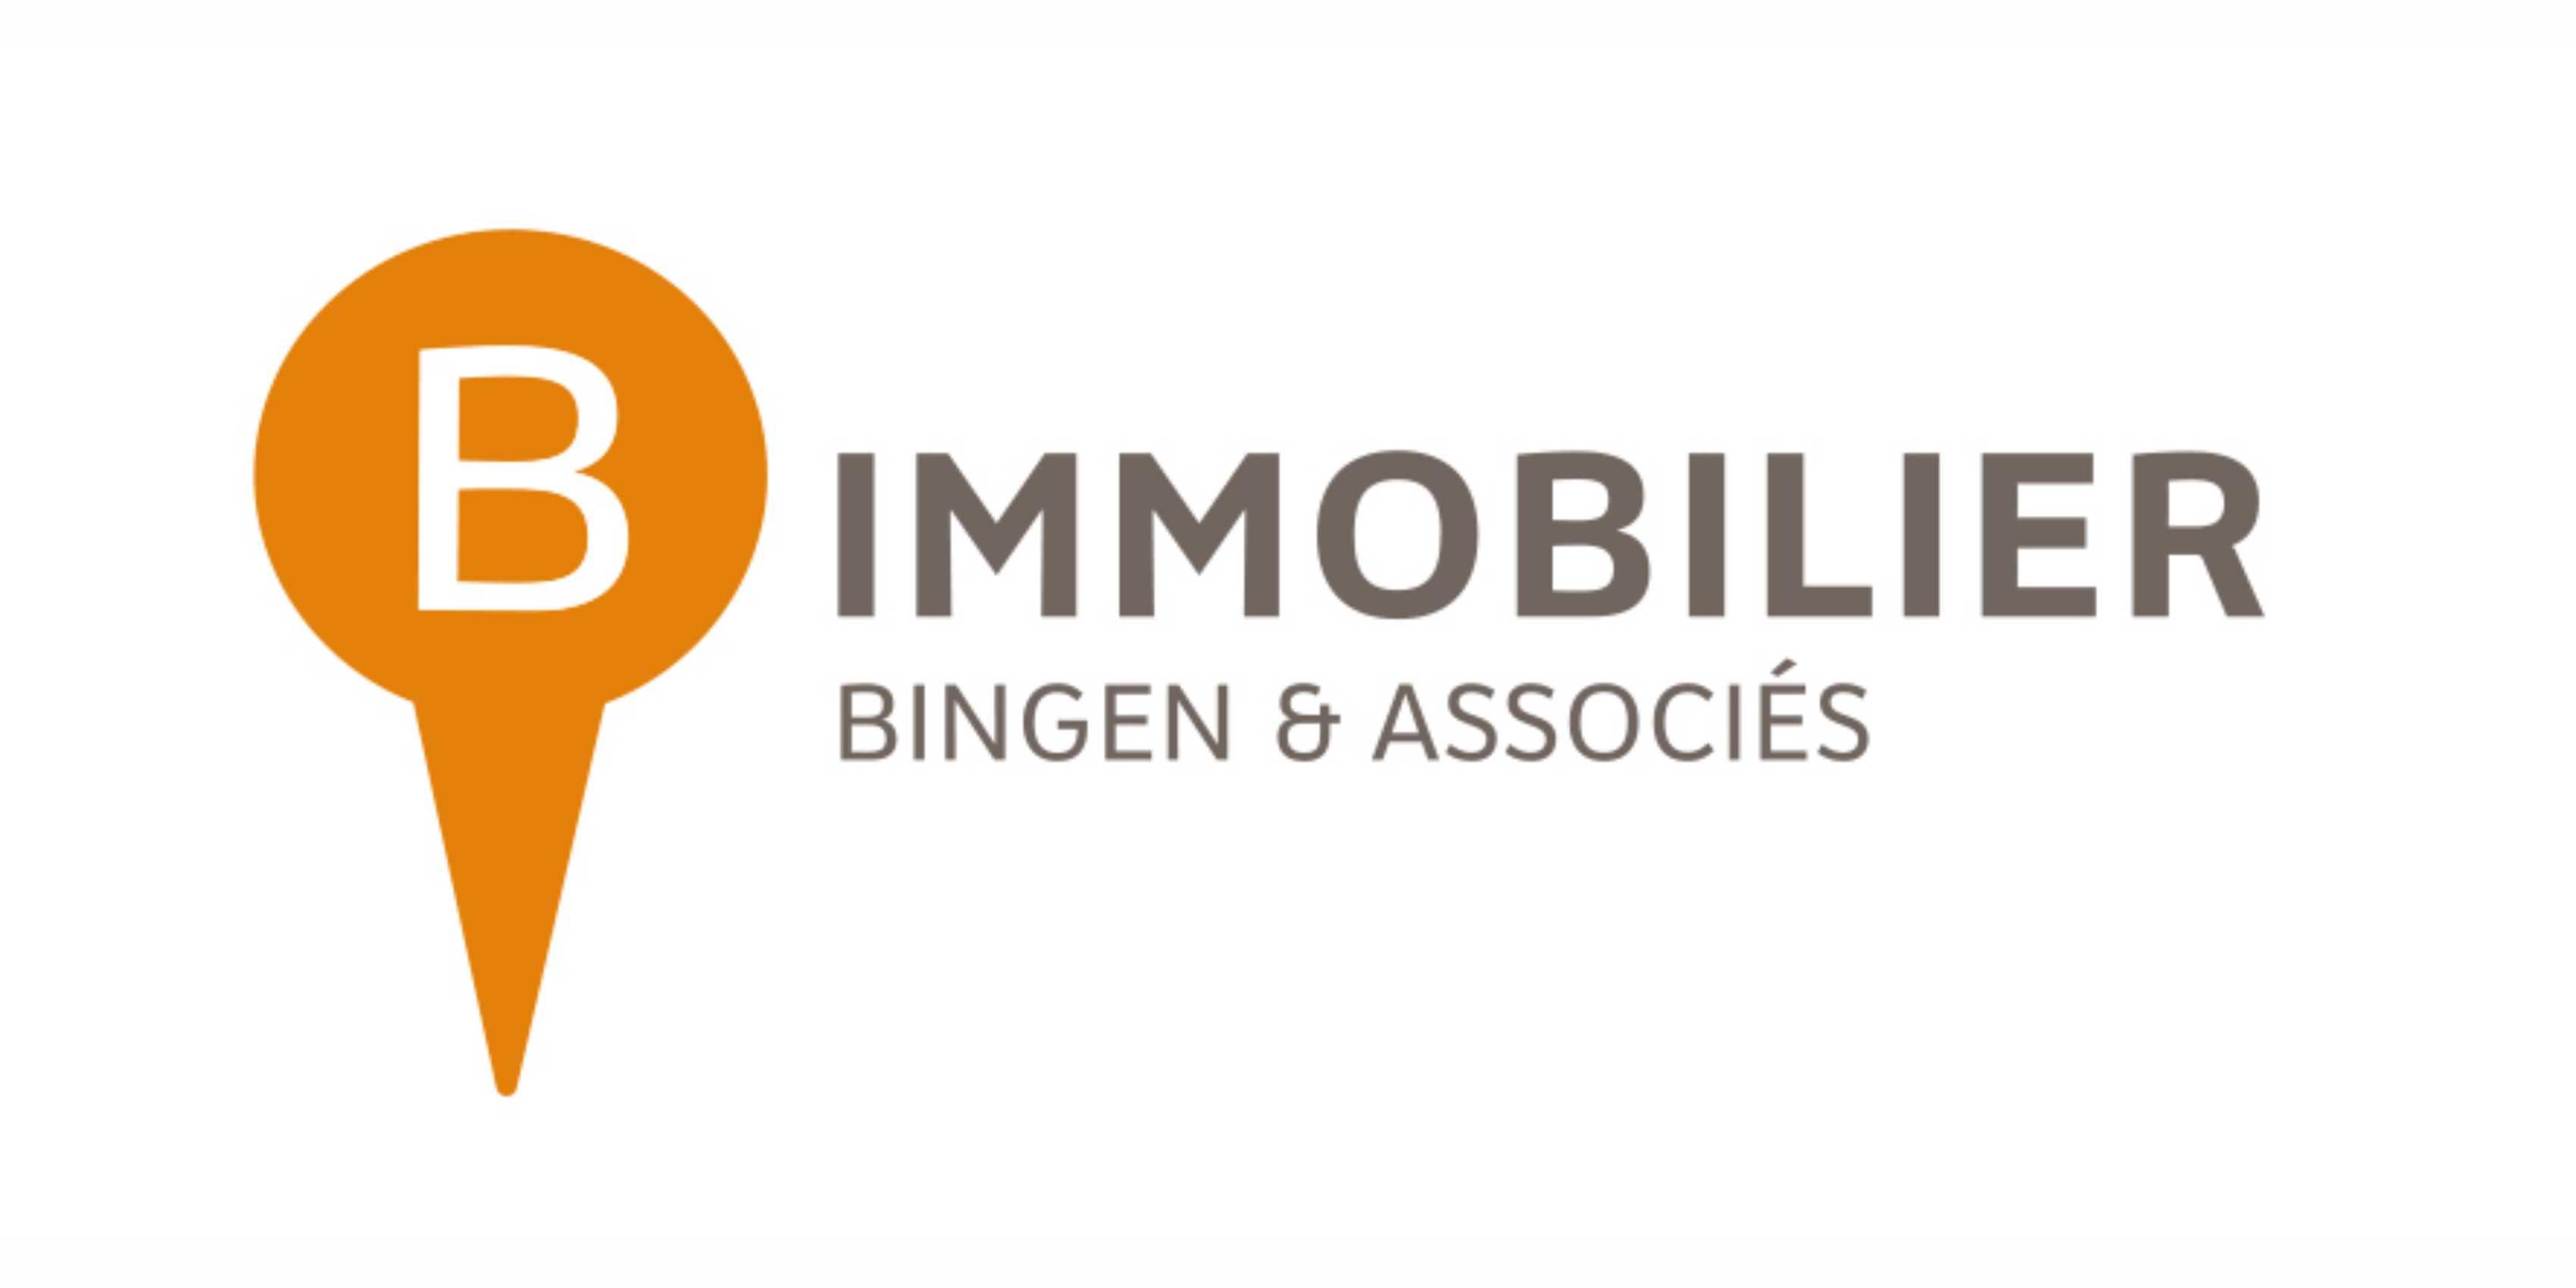 B-Immobilier